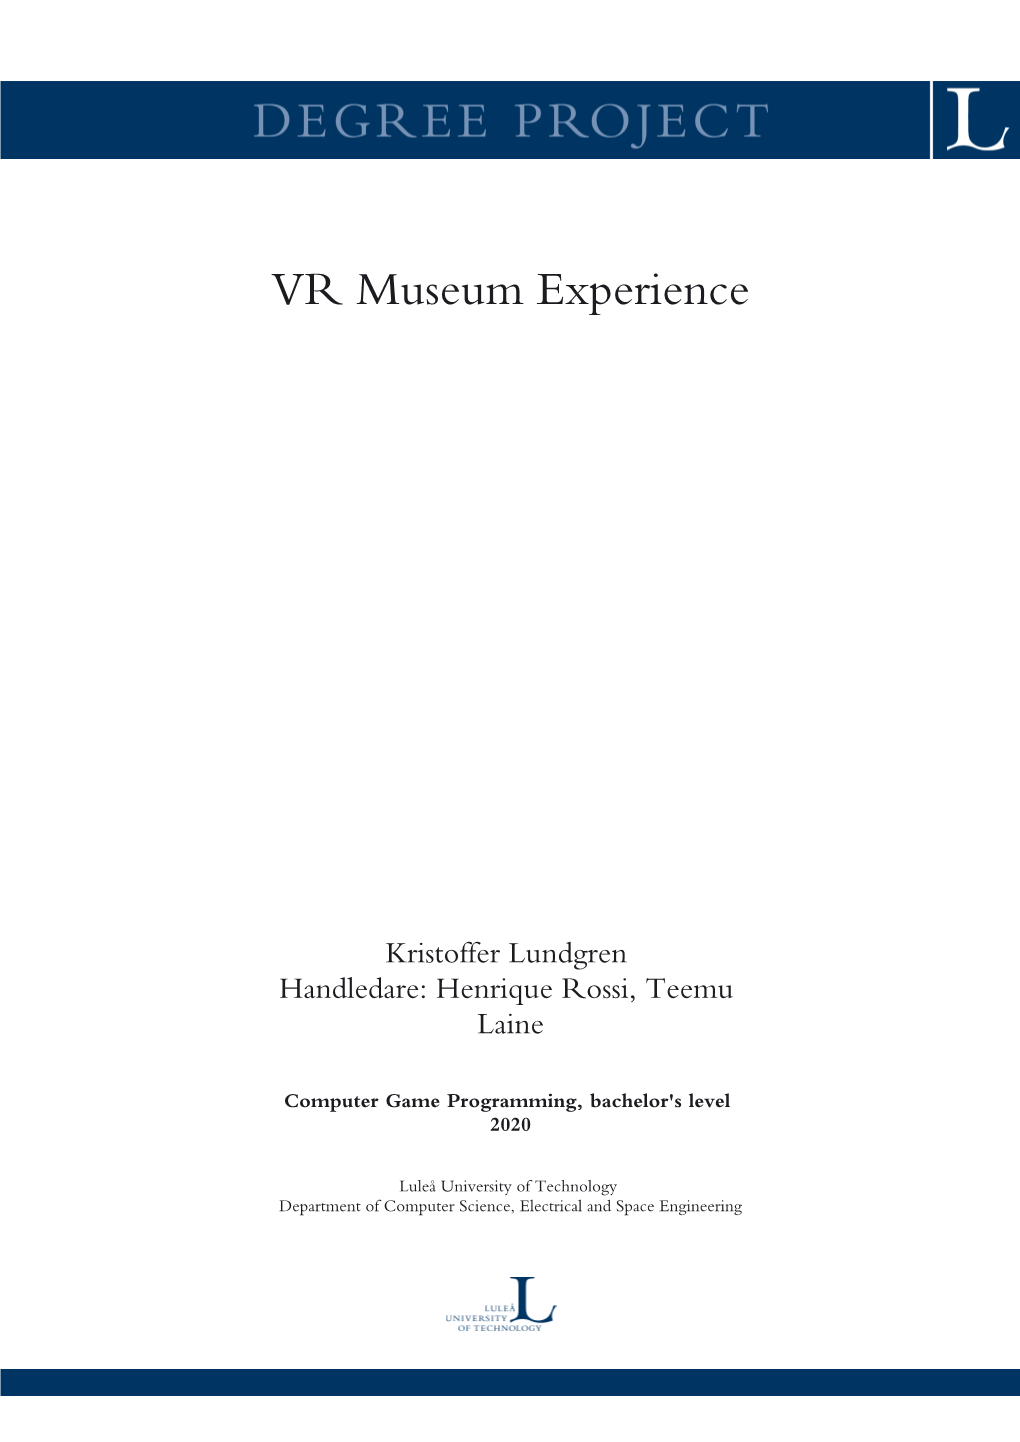 VR Museum Experience